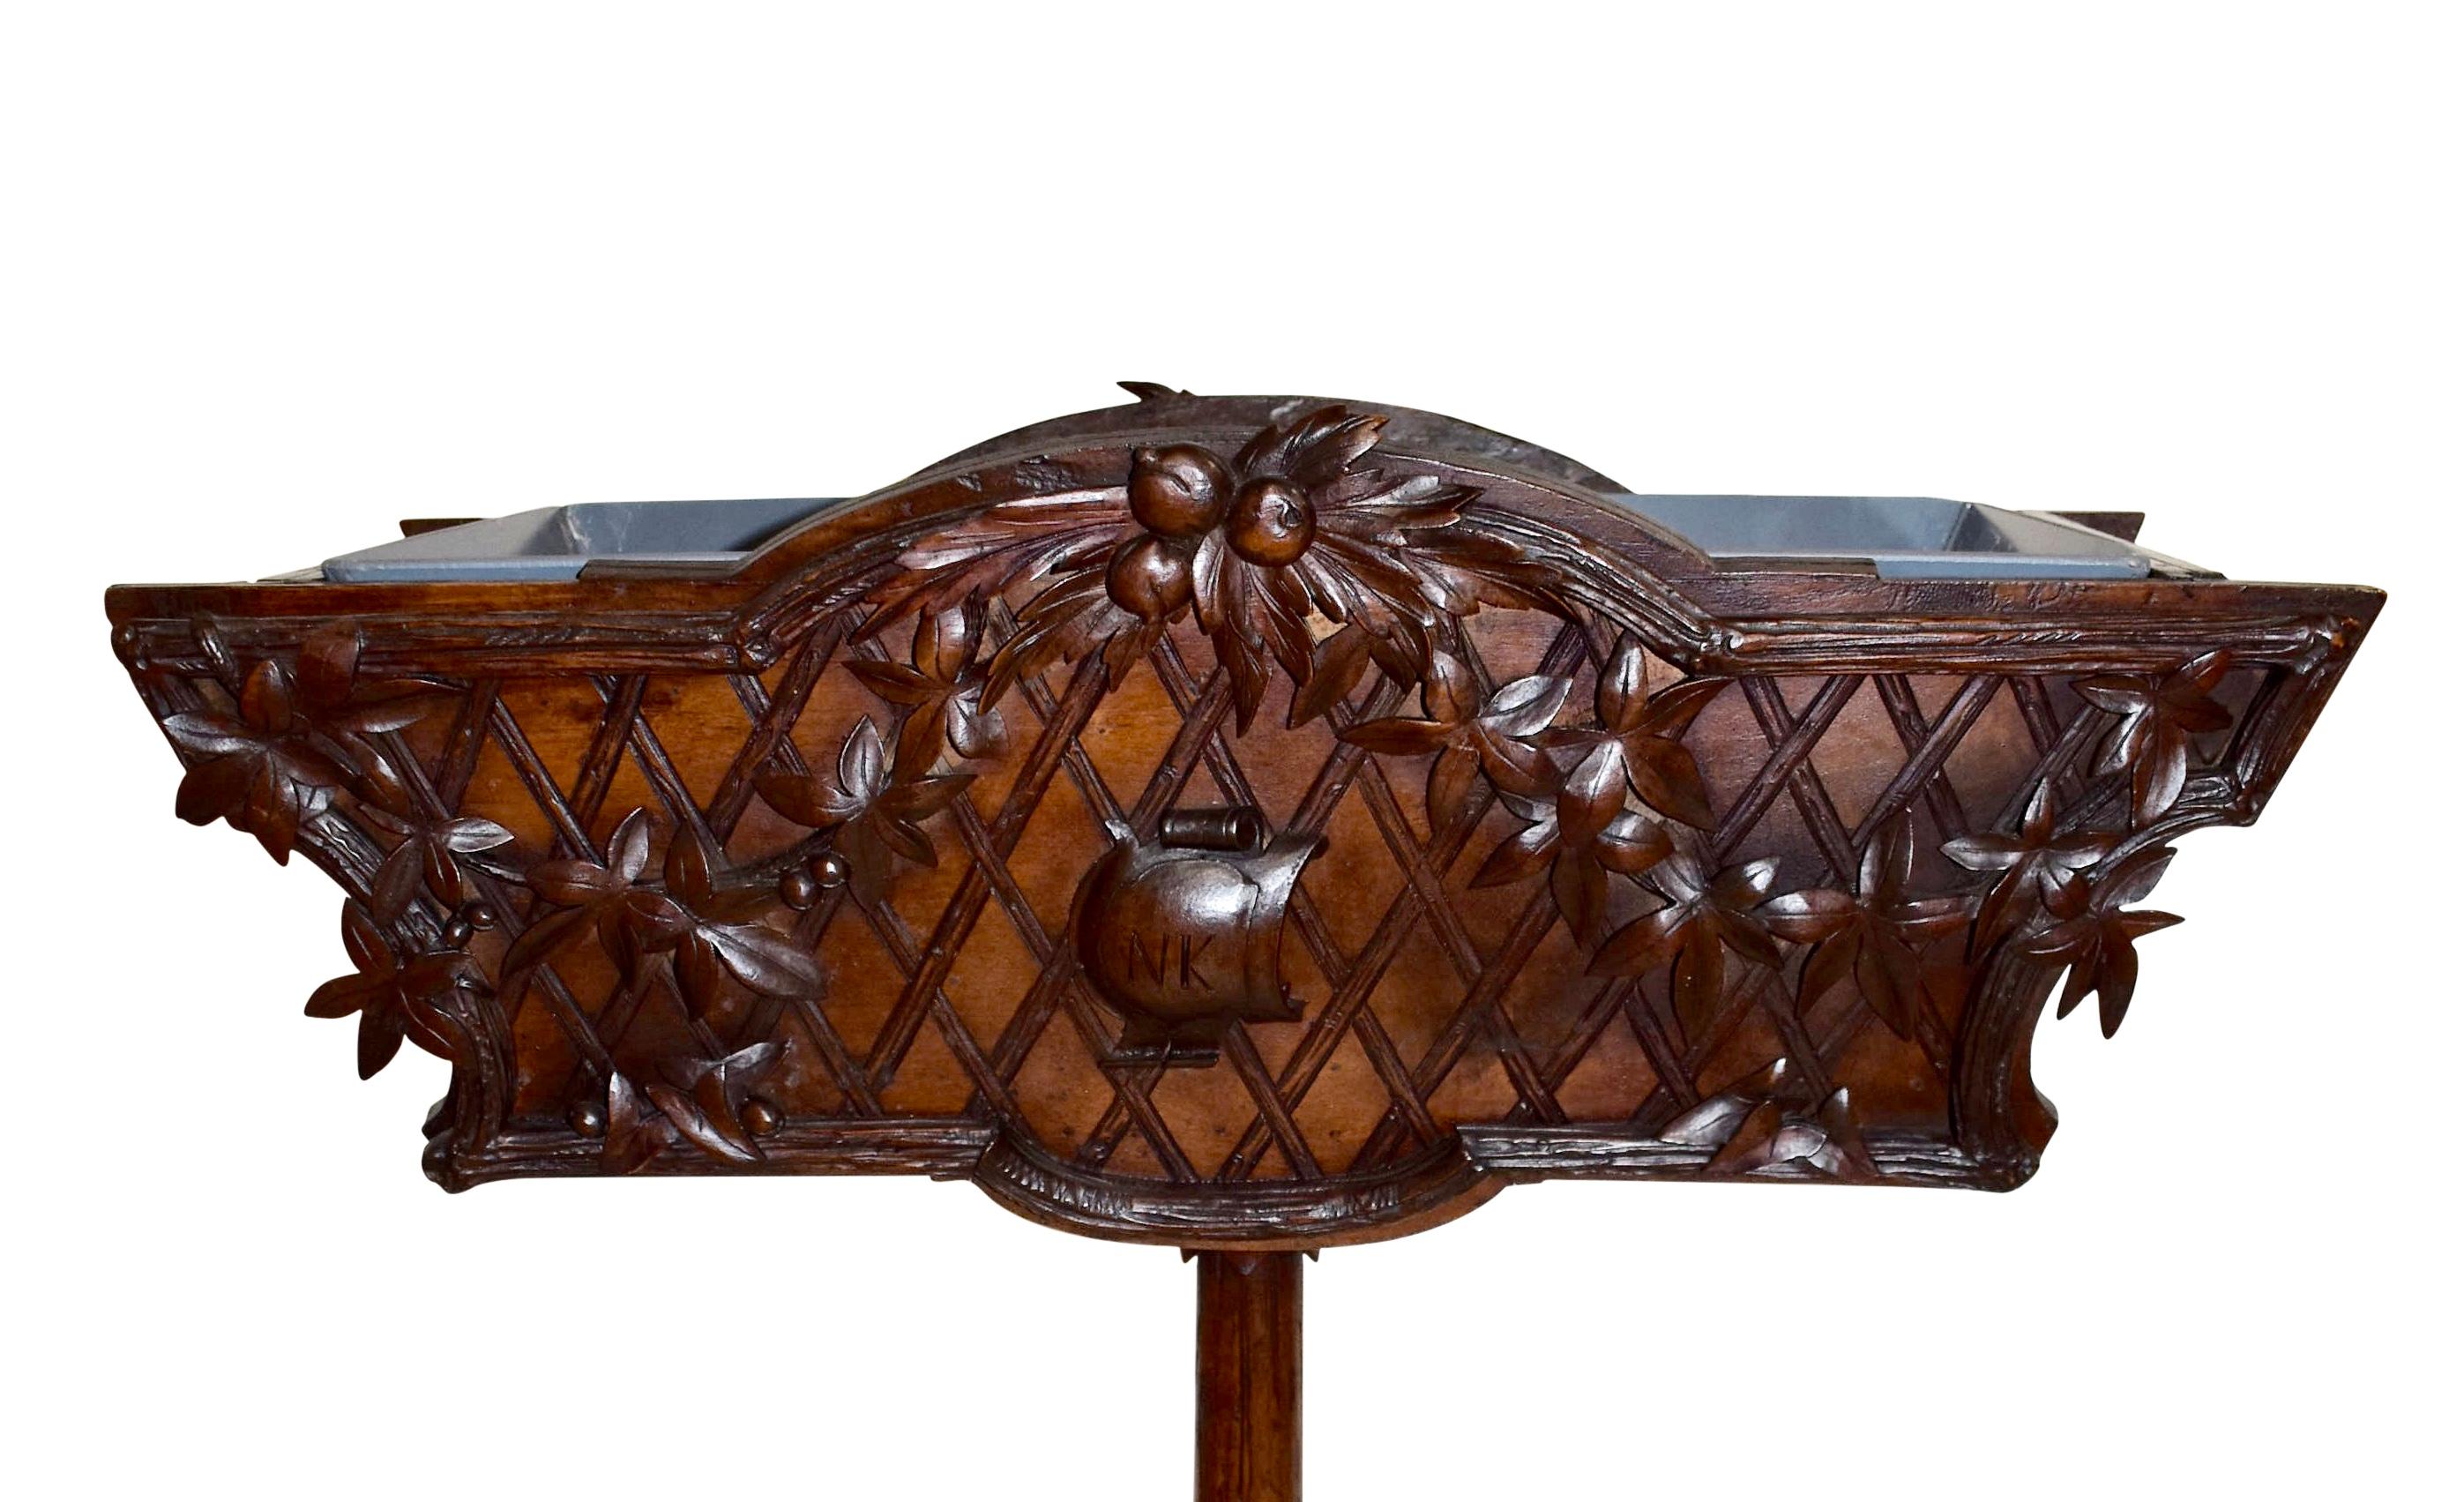 Swiss Black Forest Carved Wooden Planter Box / Jardinière, circa 1895 For Sale 2